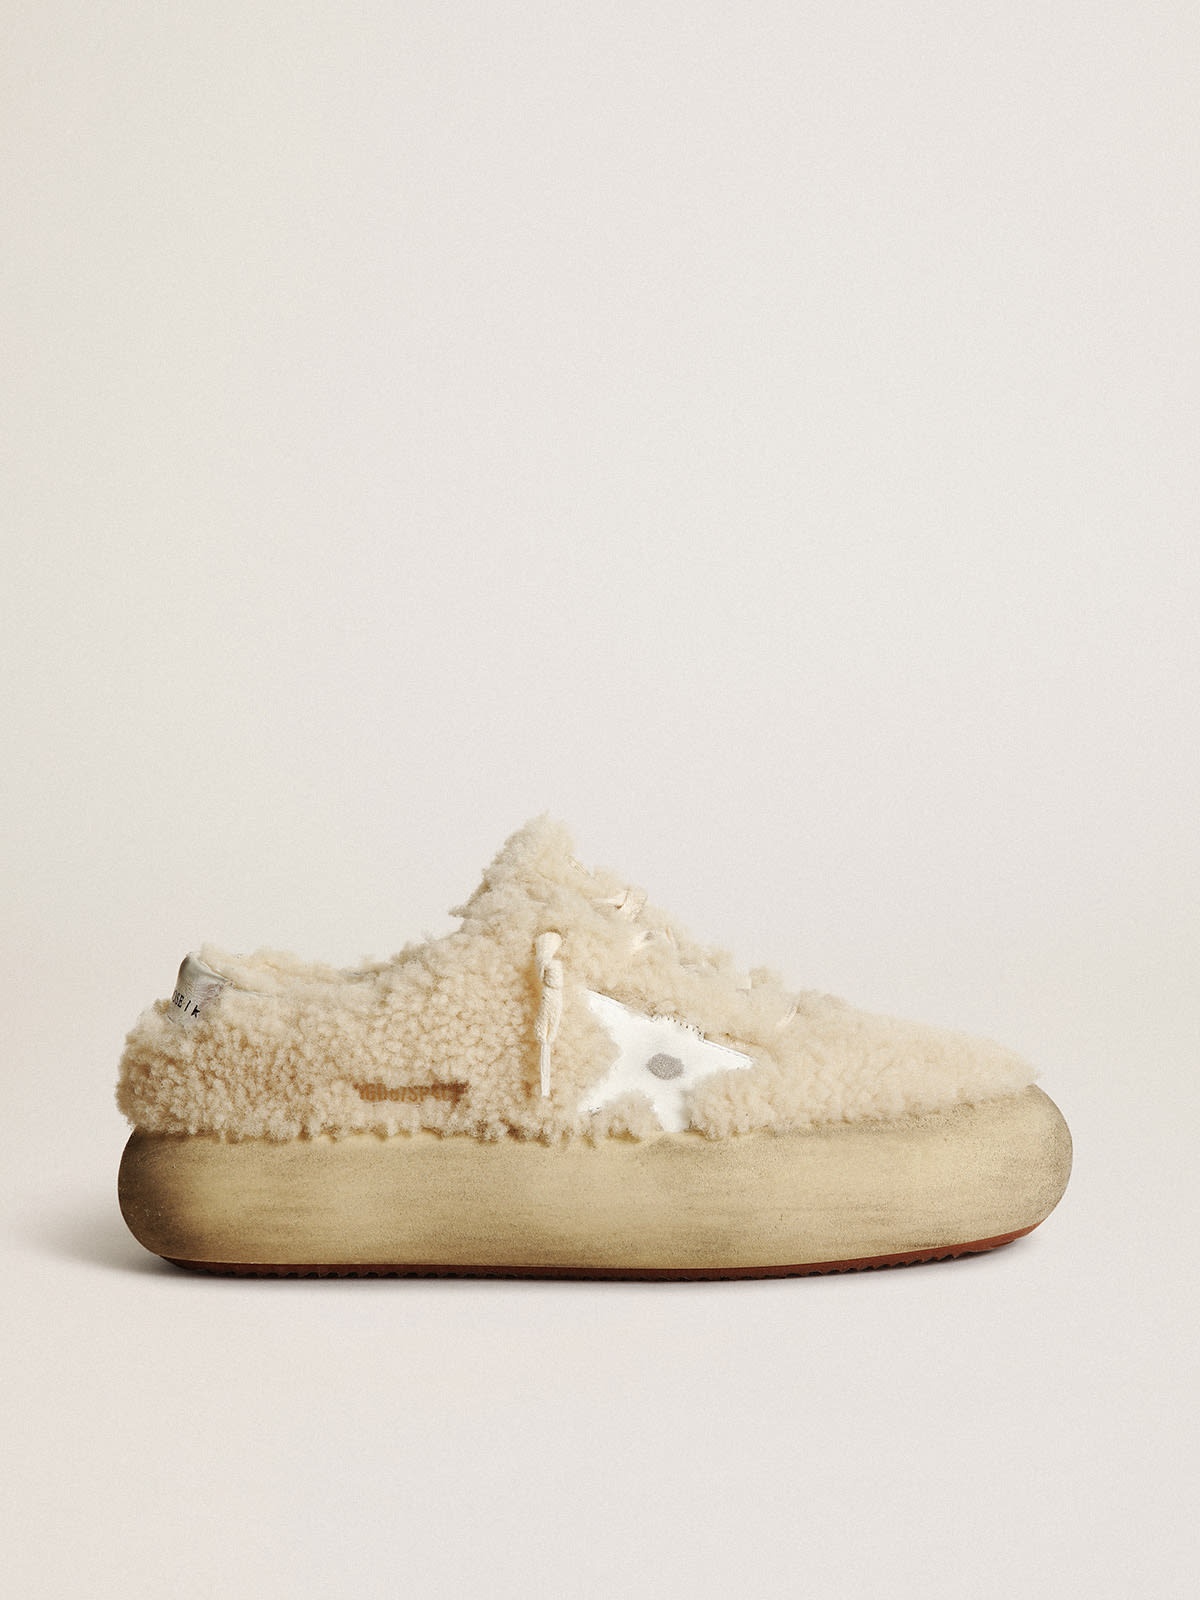 Women’s Space-Star shoes in beige shearling with white leather star and metallic leather heel tab - 1